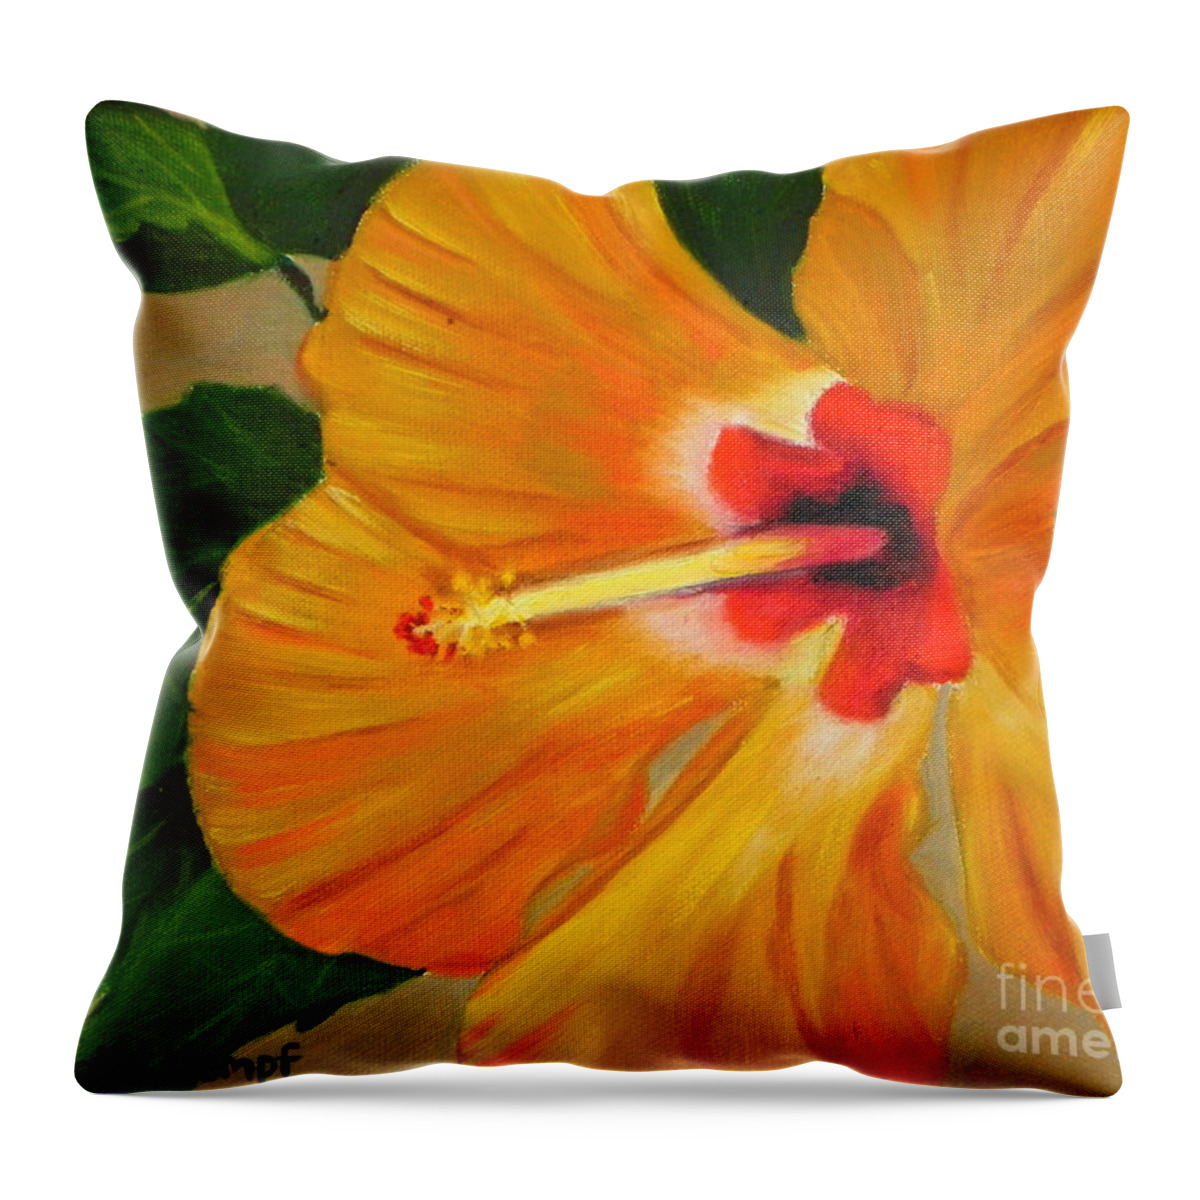 Art Throw Pillow featuring the painting Golden Glow - Hibiscus Flower by Shelia Kempf